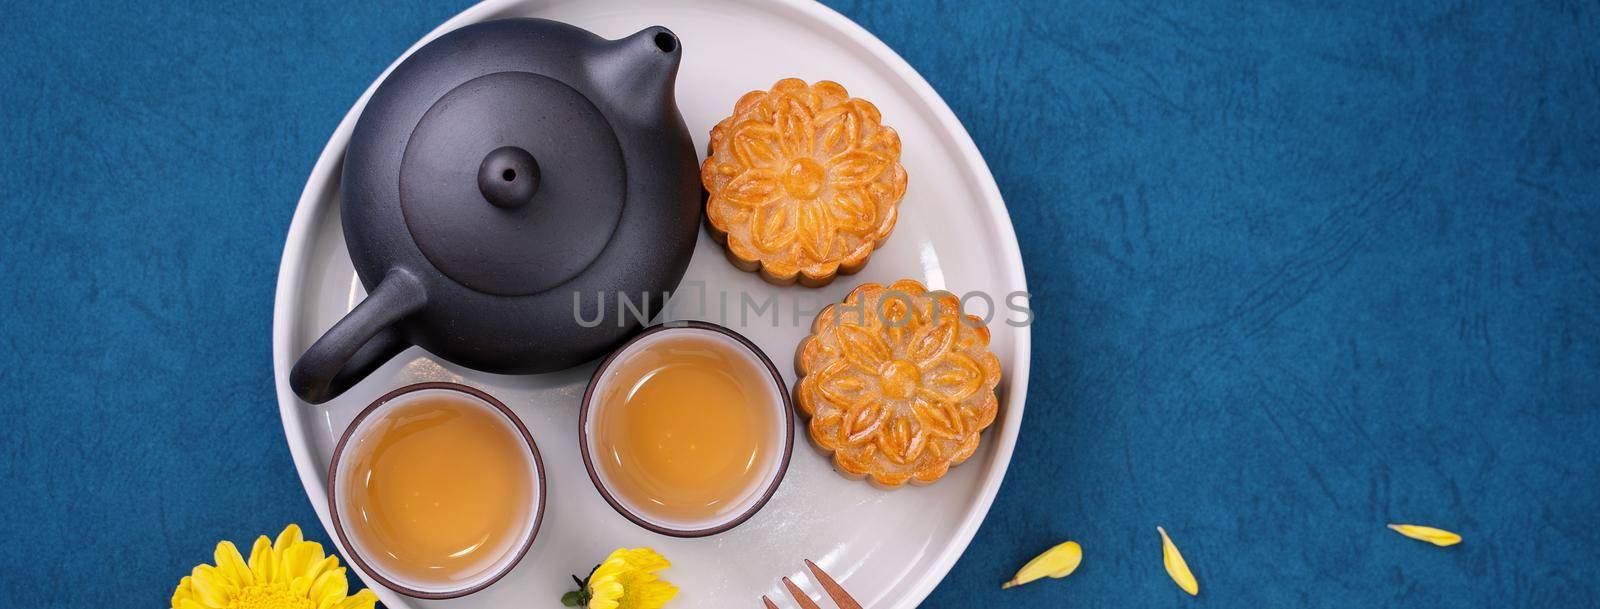 Minimal simplicity layout moon cakes on blue background for Mid-Autumn Festival, creative food design concept, top view, flat lay, copy space. by ROMIXIMAGE